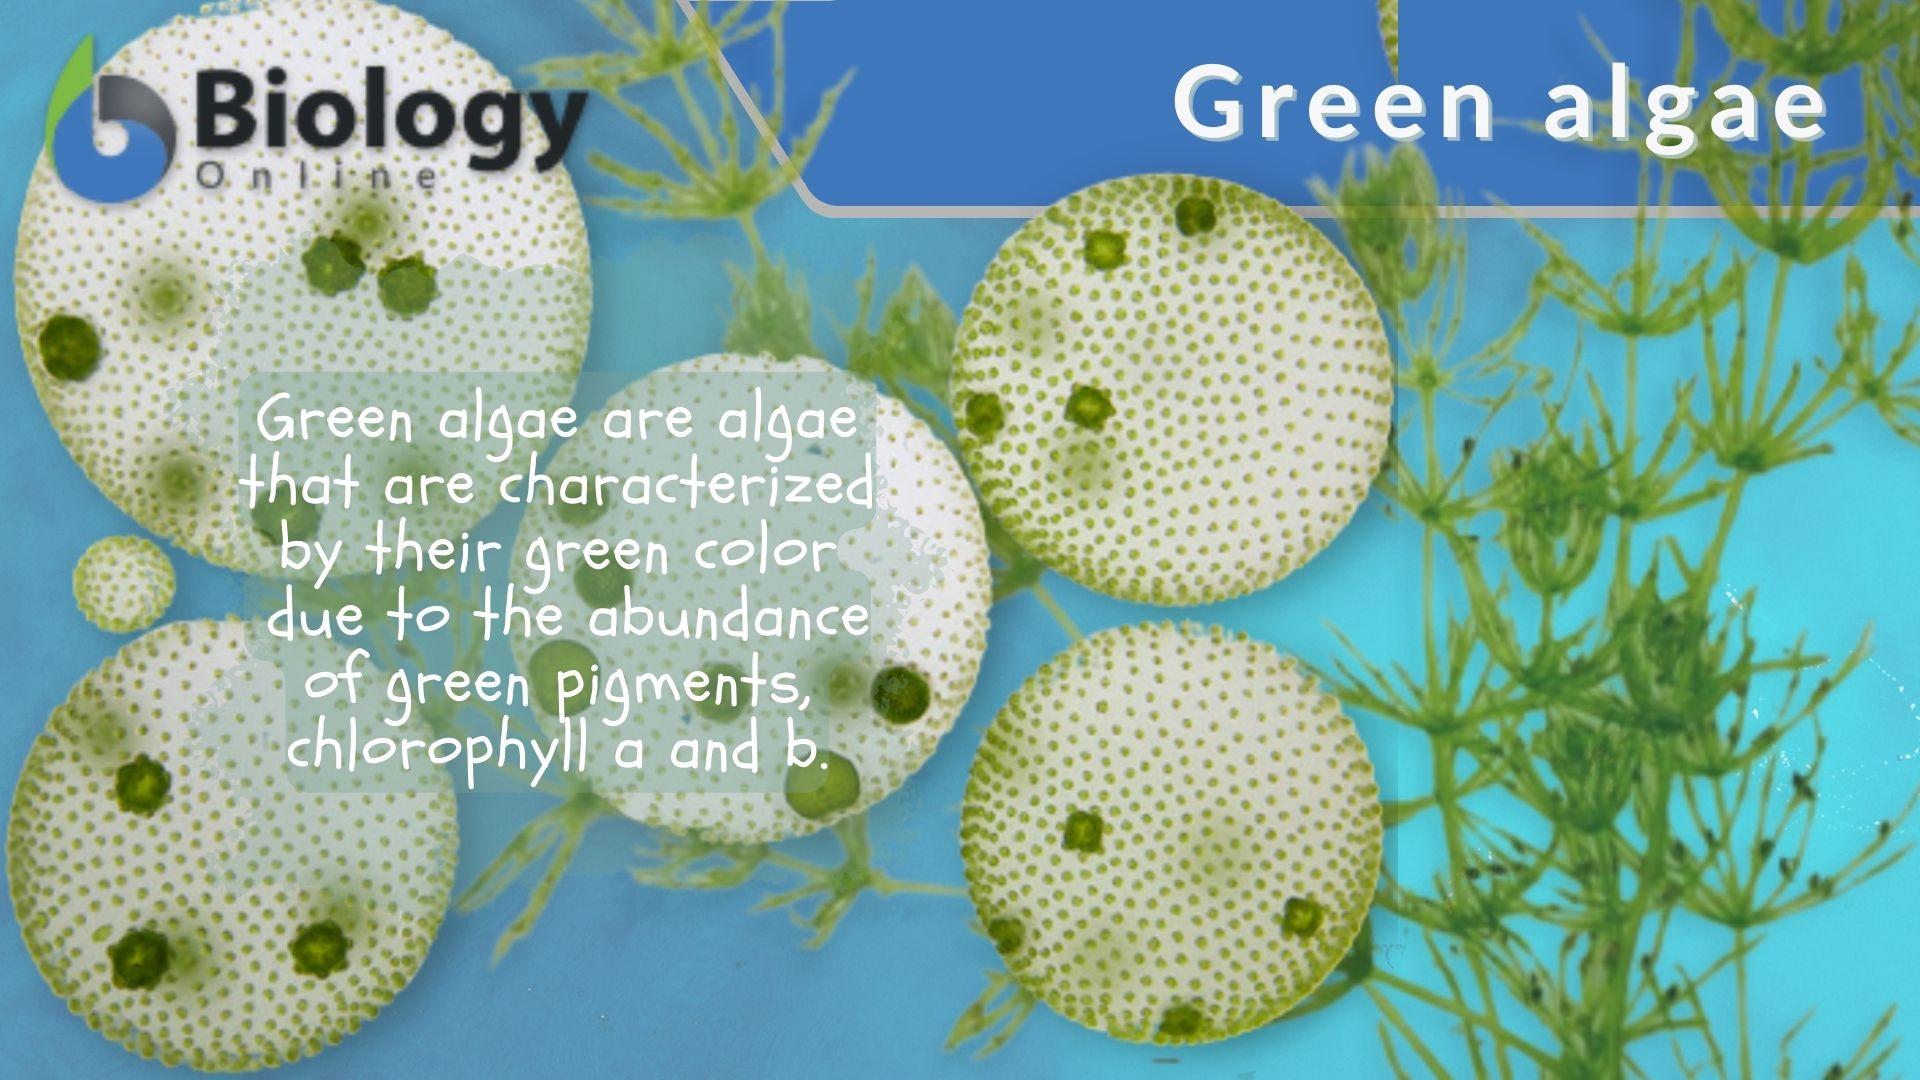 Green algae - Definition and Examples - Biology Online Dictionary